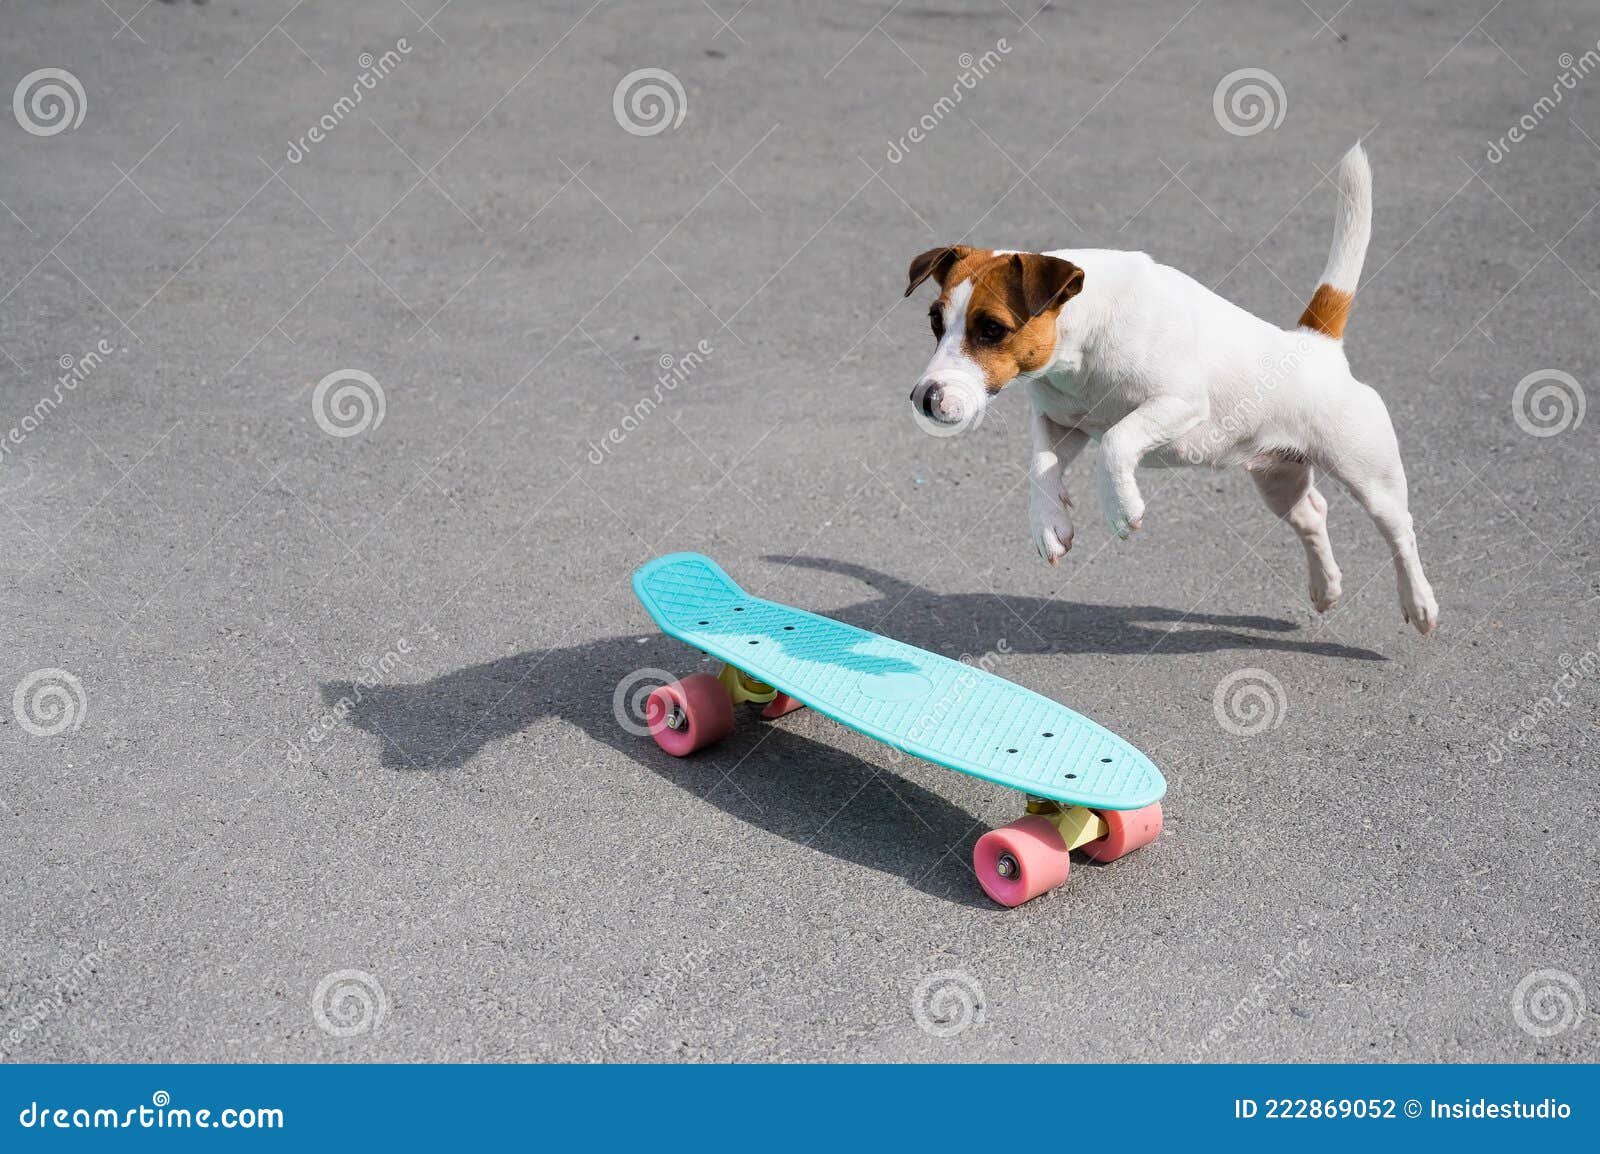 The Rides a Penny Board Outdoors. Russell Performing Tricks on a Skateboard Stock Photo - Image of purebred, 222869052